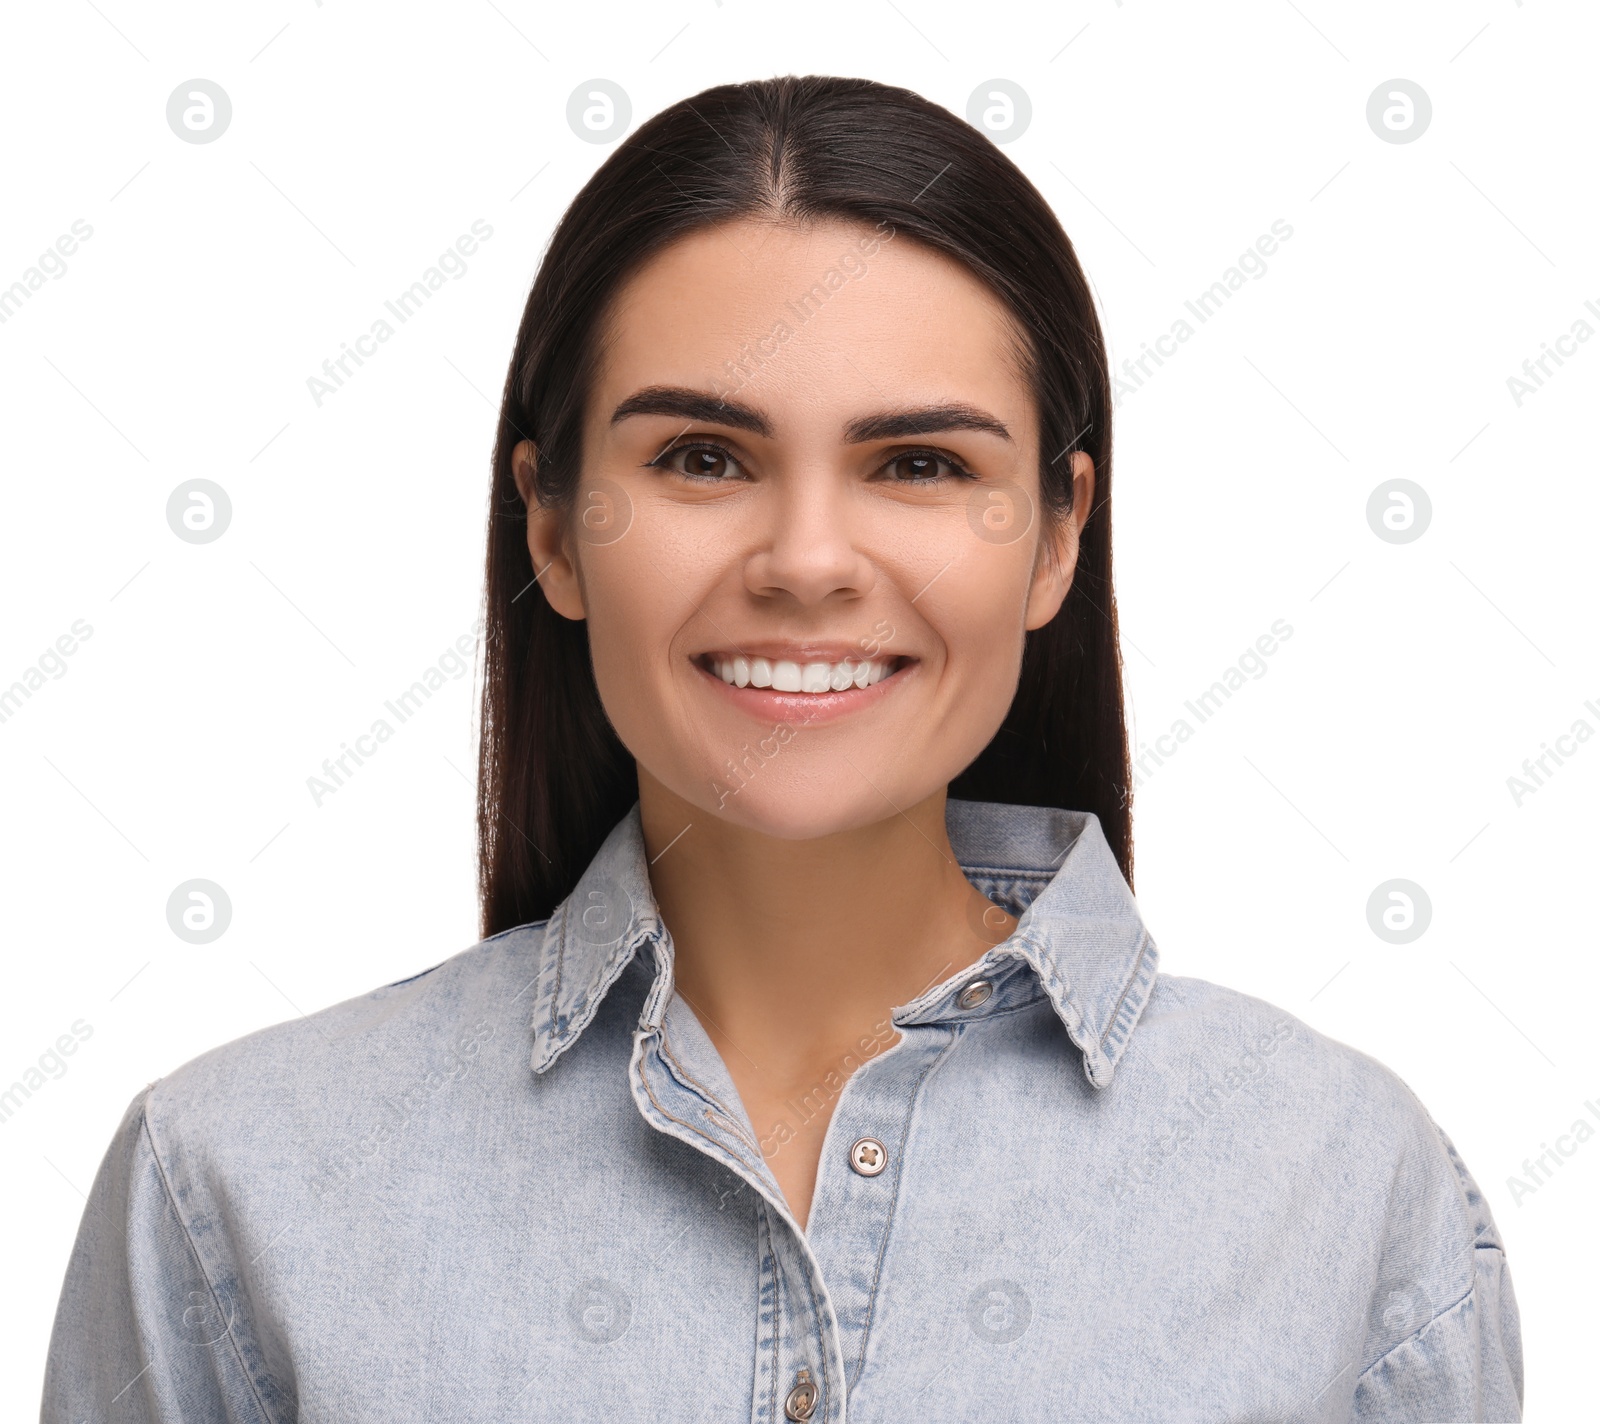 Photo of Young woman with clean teeth smiling on white background